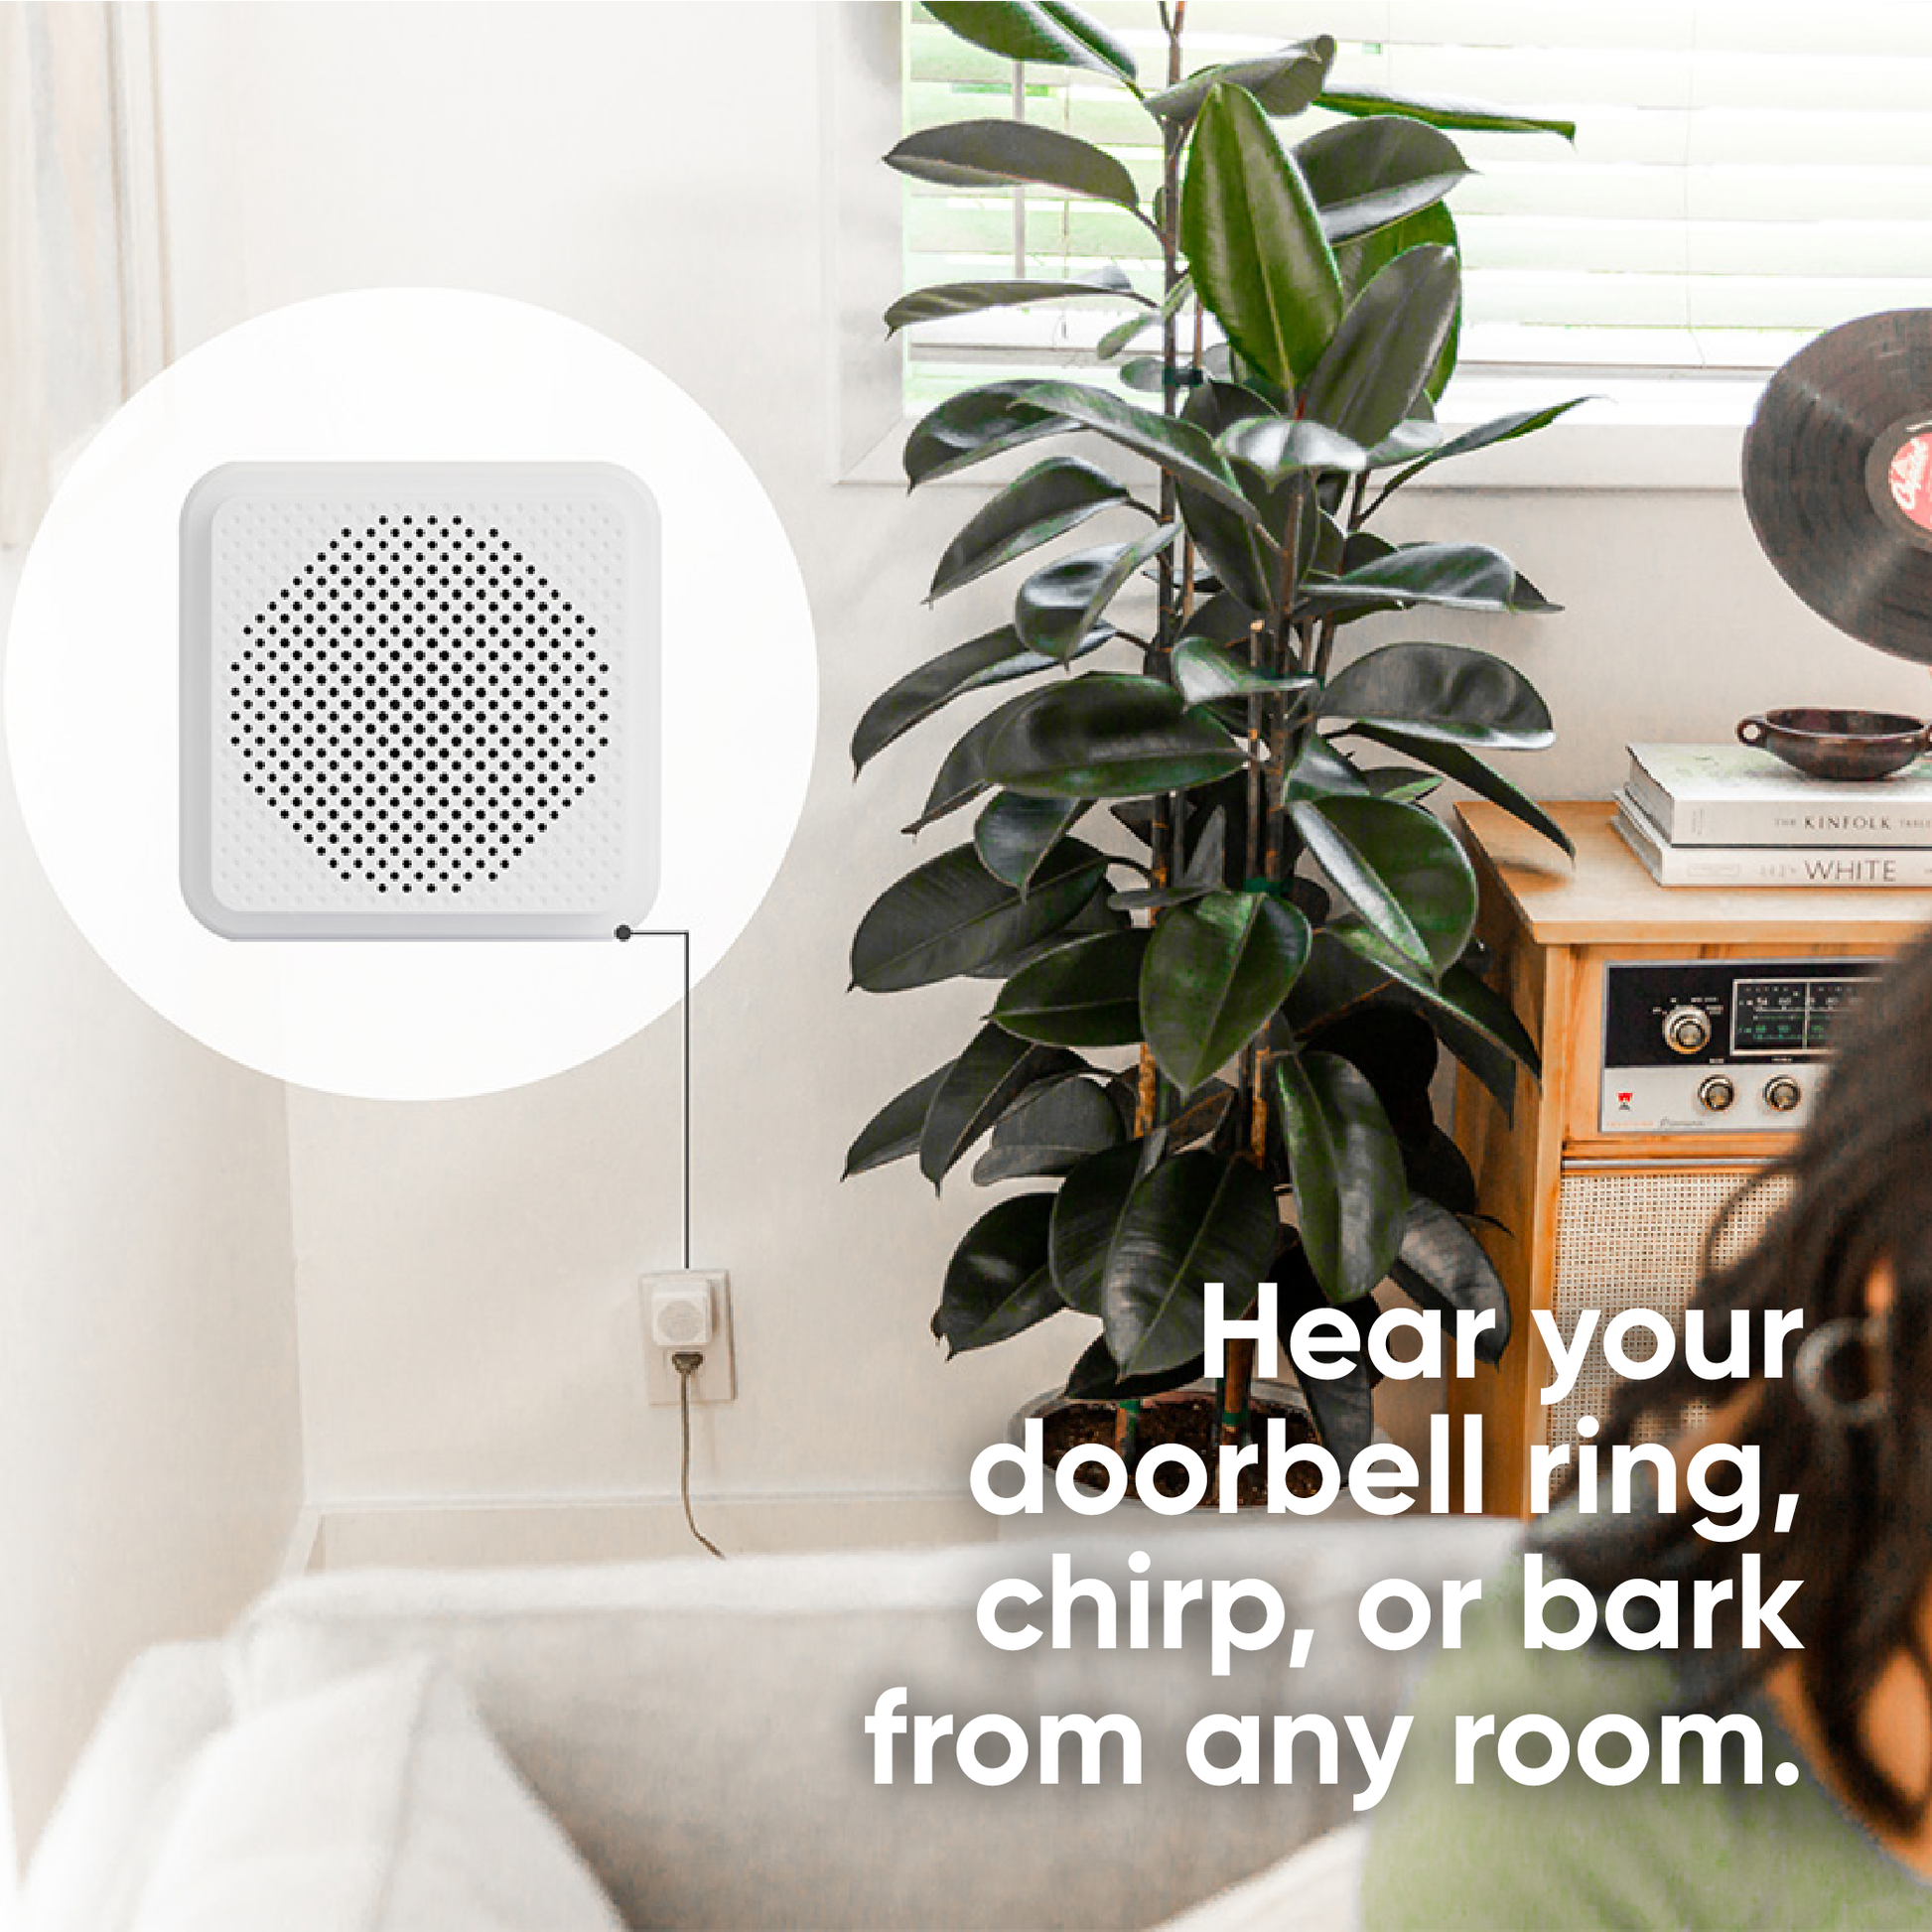 Sized up image of Wyze chime showing device plugged into an outlet. Text overlay "Hear your doorbell ring... from any room."